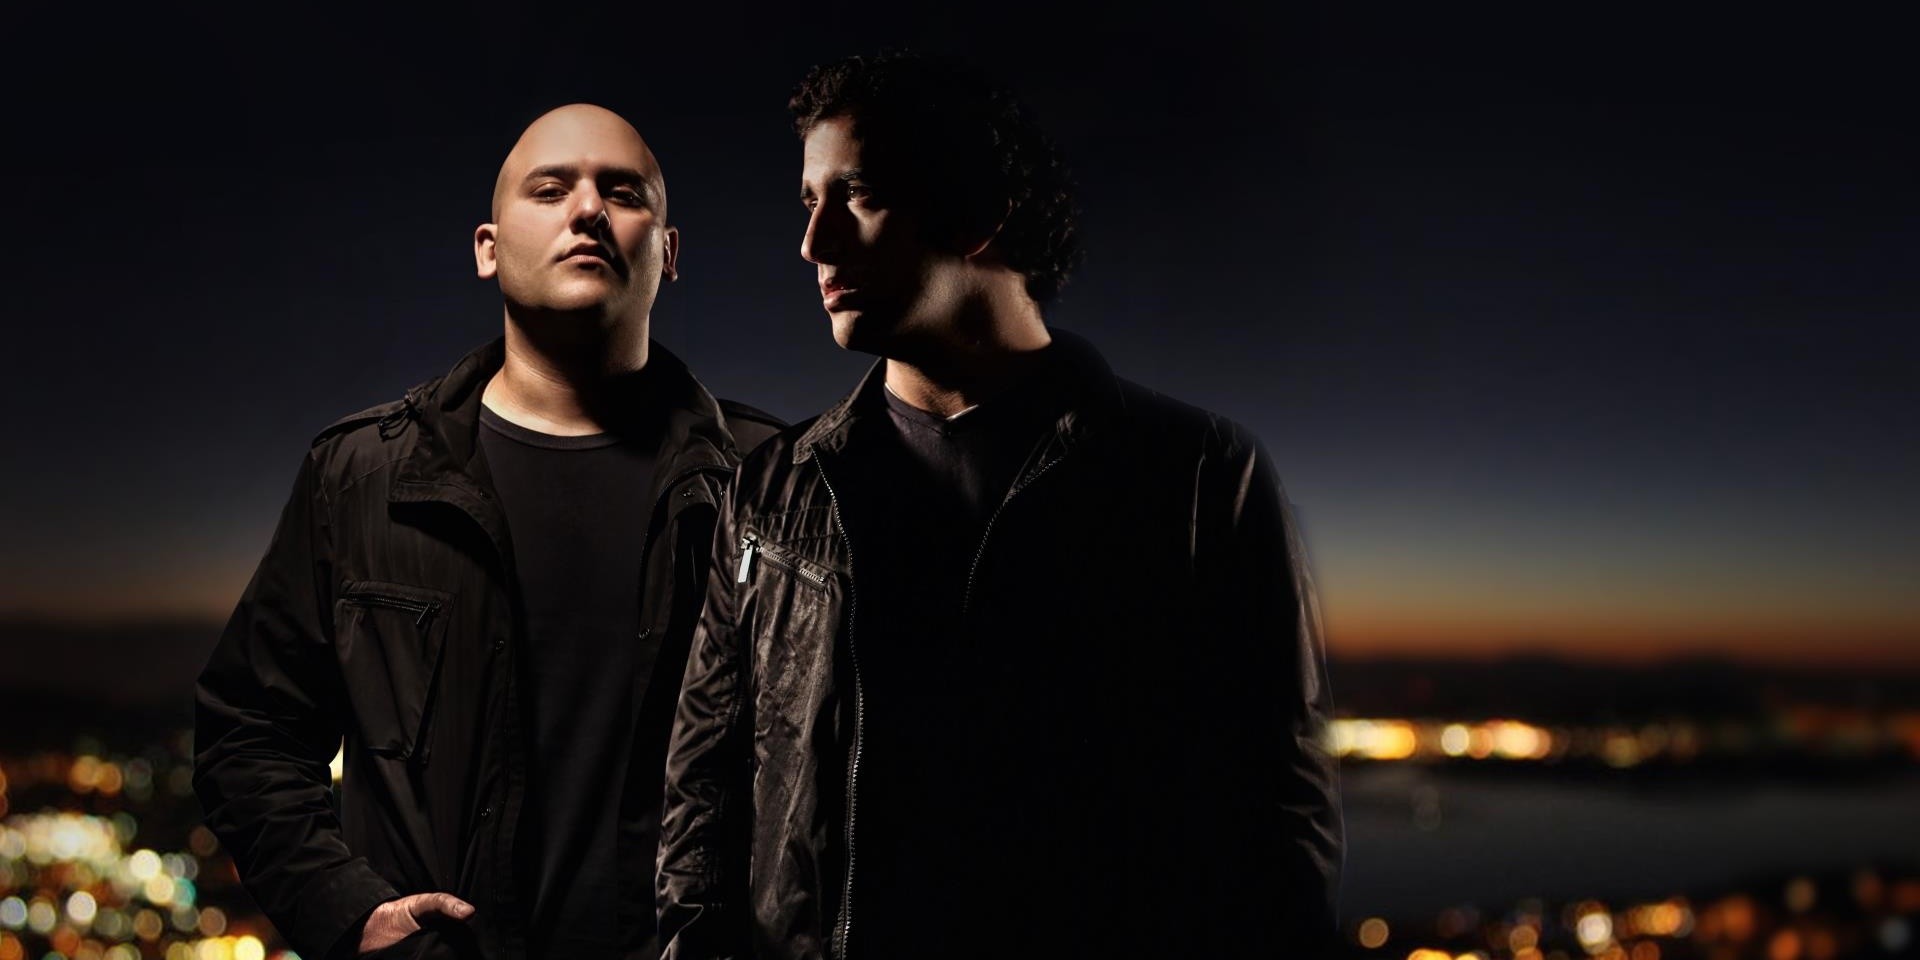 Aly & Fila to perform at La Playa by FOC Sentosa in Singapore this October 